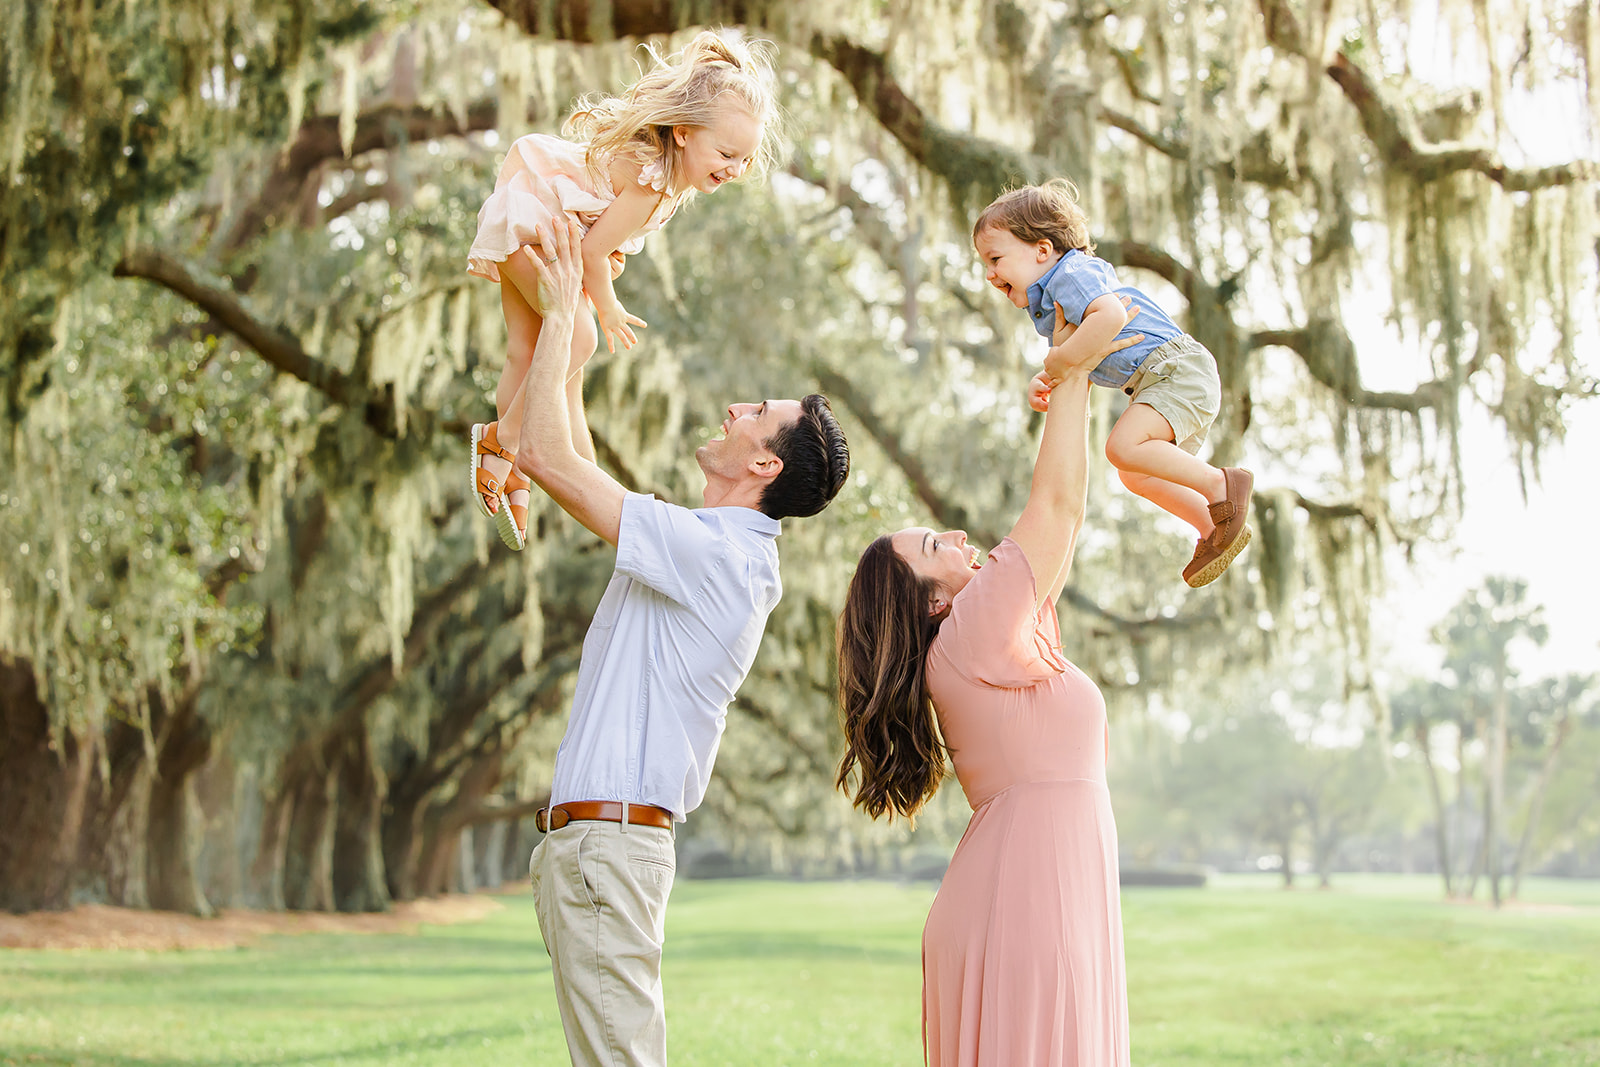 St. Simons Island 
Family Photography at The Avenue of the Oaks